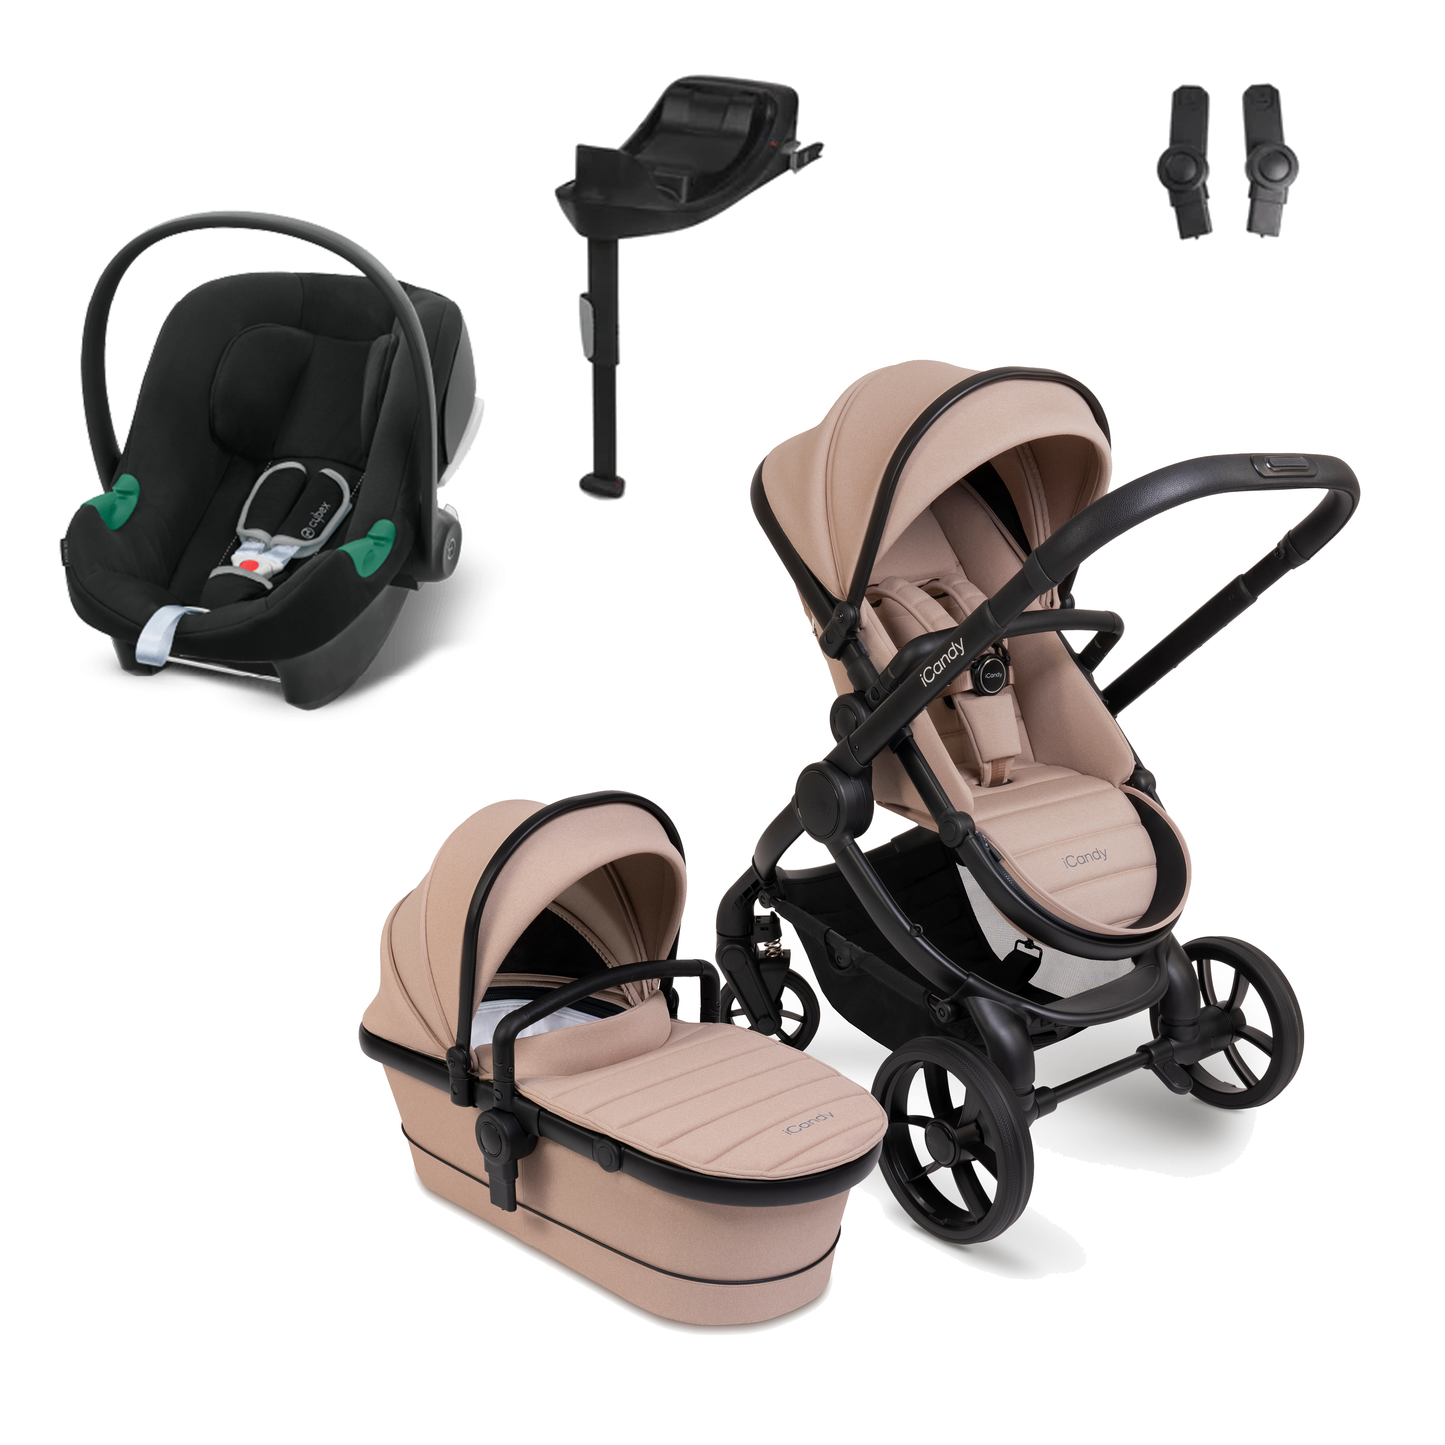 iCandy Peach 7 with Cybex Aton B2 and Base